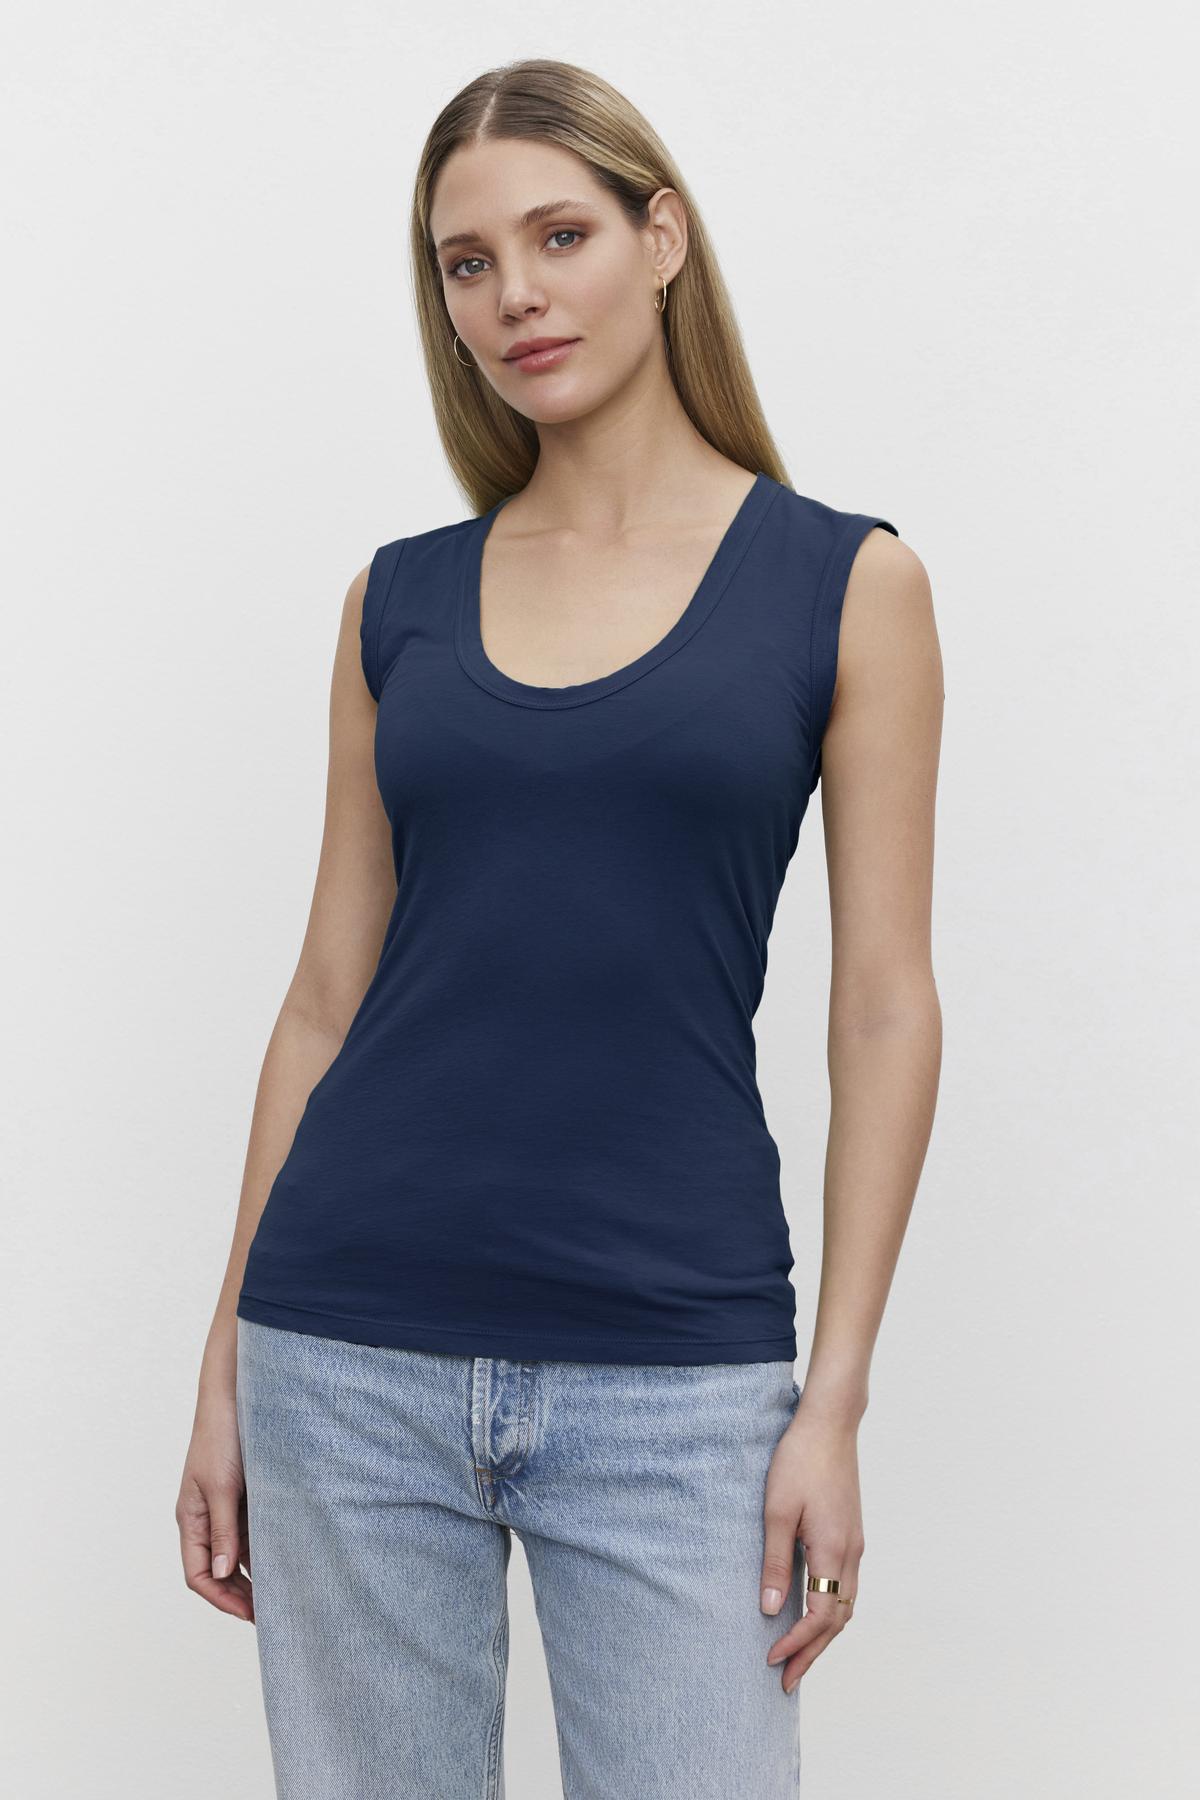 A woman in a navy ESTINA GAUZY WHISPER FITTED TANK TOP by Velvet by Graham & Spencer and jeans.-36273869553857